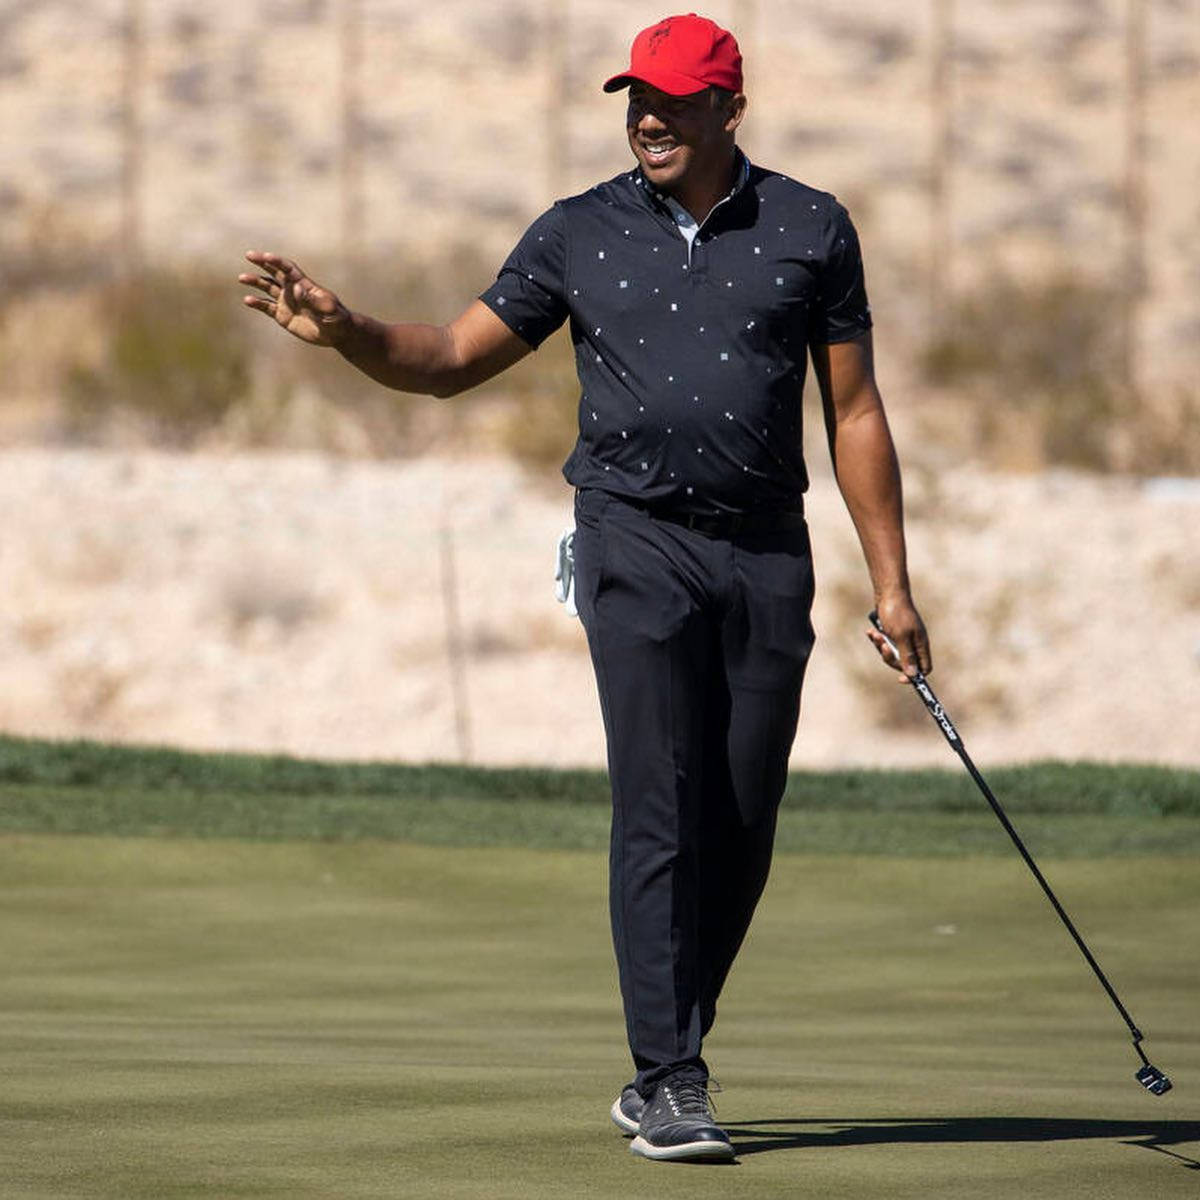 Jhonattanvegas Vinkar. (this Would Likely Be A Caption Describing A Wallpaper Image Of Jhonattan Vegas Waving, Such As A Photograph Or Illustration Of Him Doing So.) Wallpaper